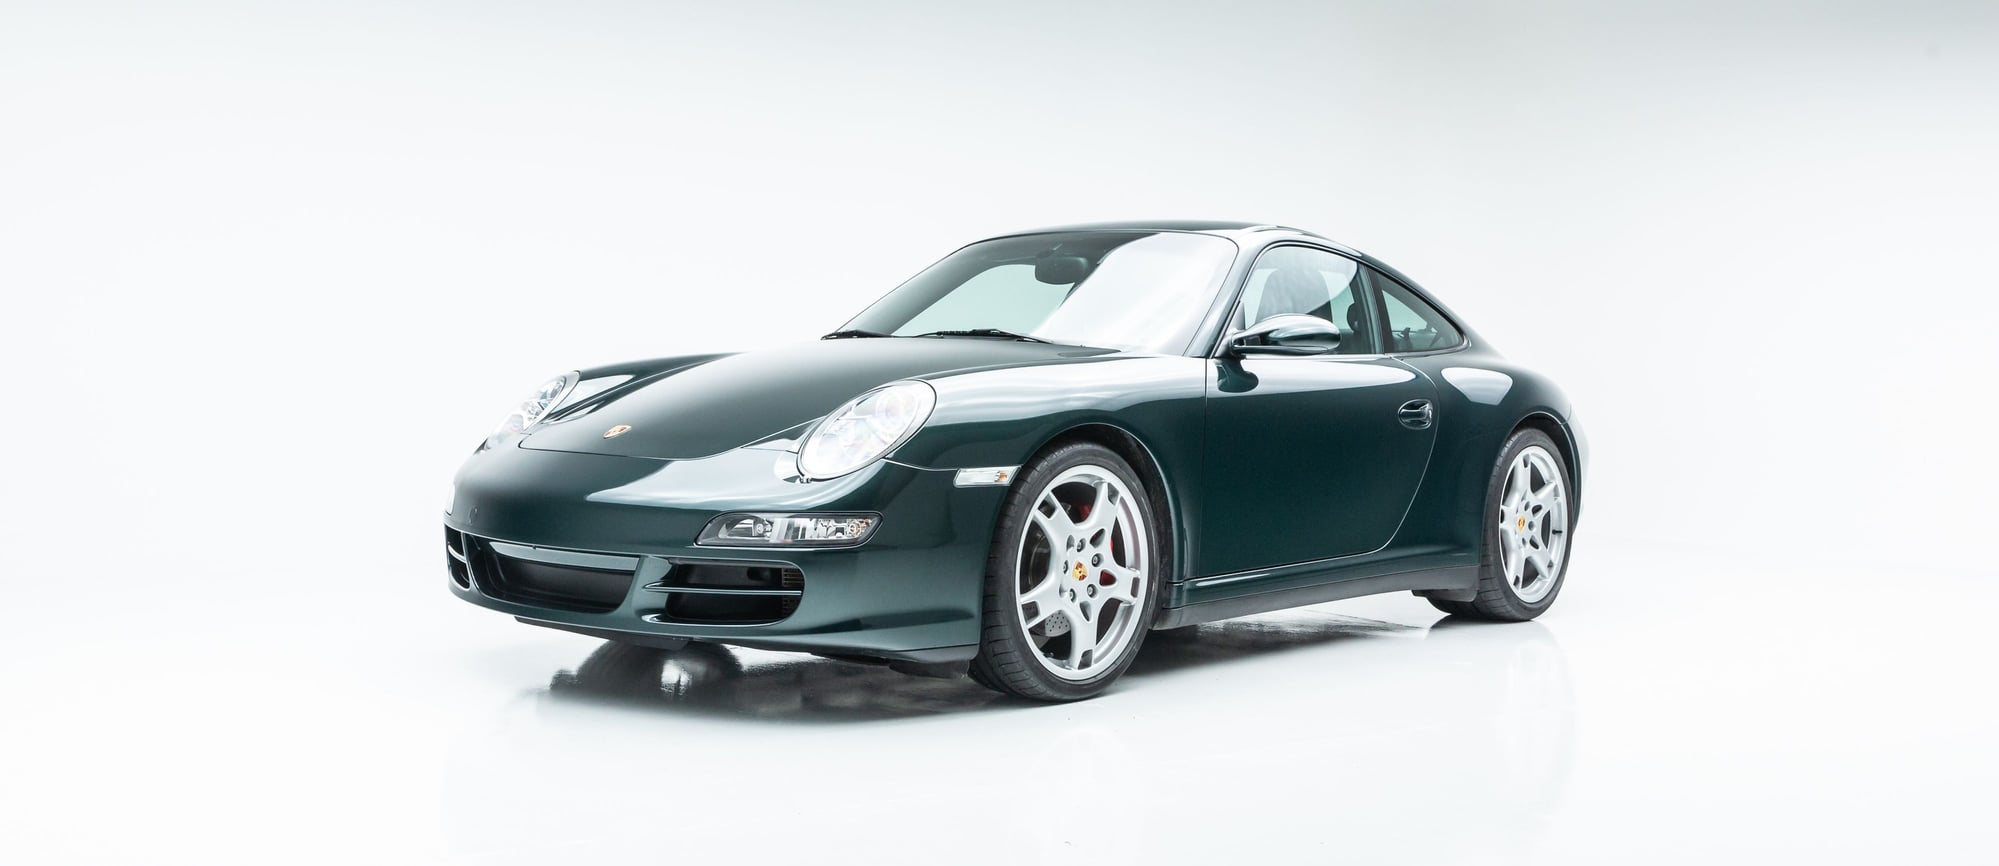 2006 Porsche 911 - 2006 997 C4S Forest Green/Palm Green 47K Miles - Used - VIN WP0AB29936S744023 - 6 cyl - AWD - Manual - Coupe - Other - Irvine, CA 92603, United States